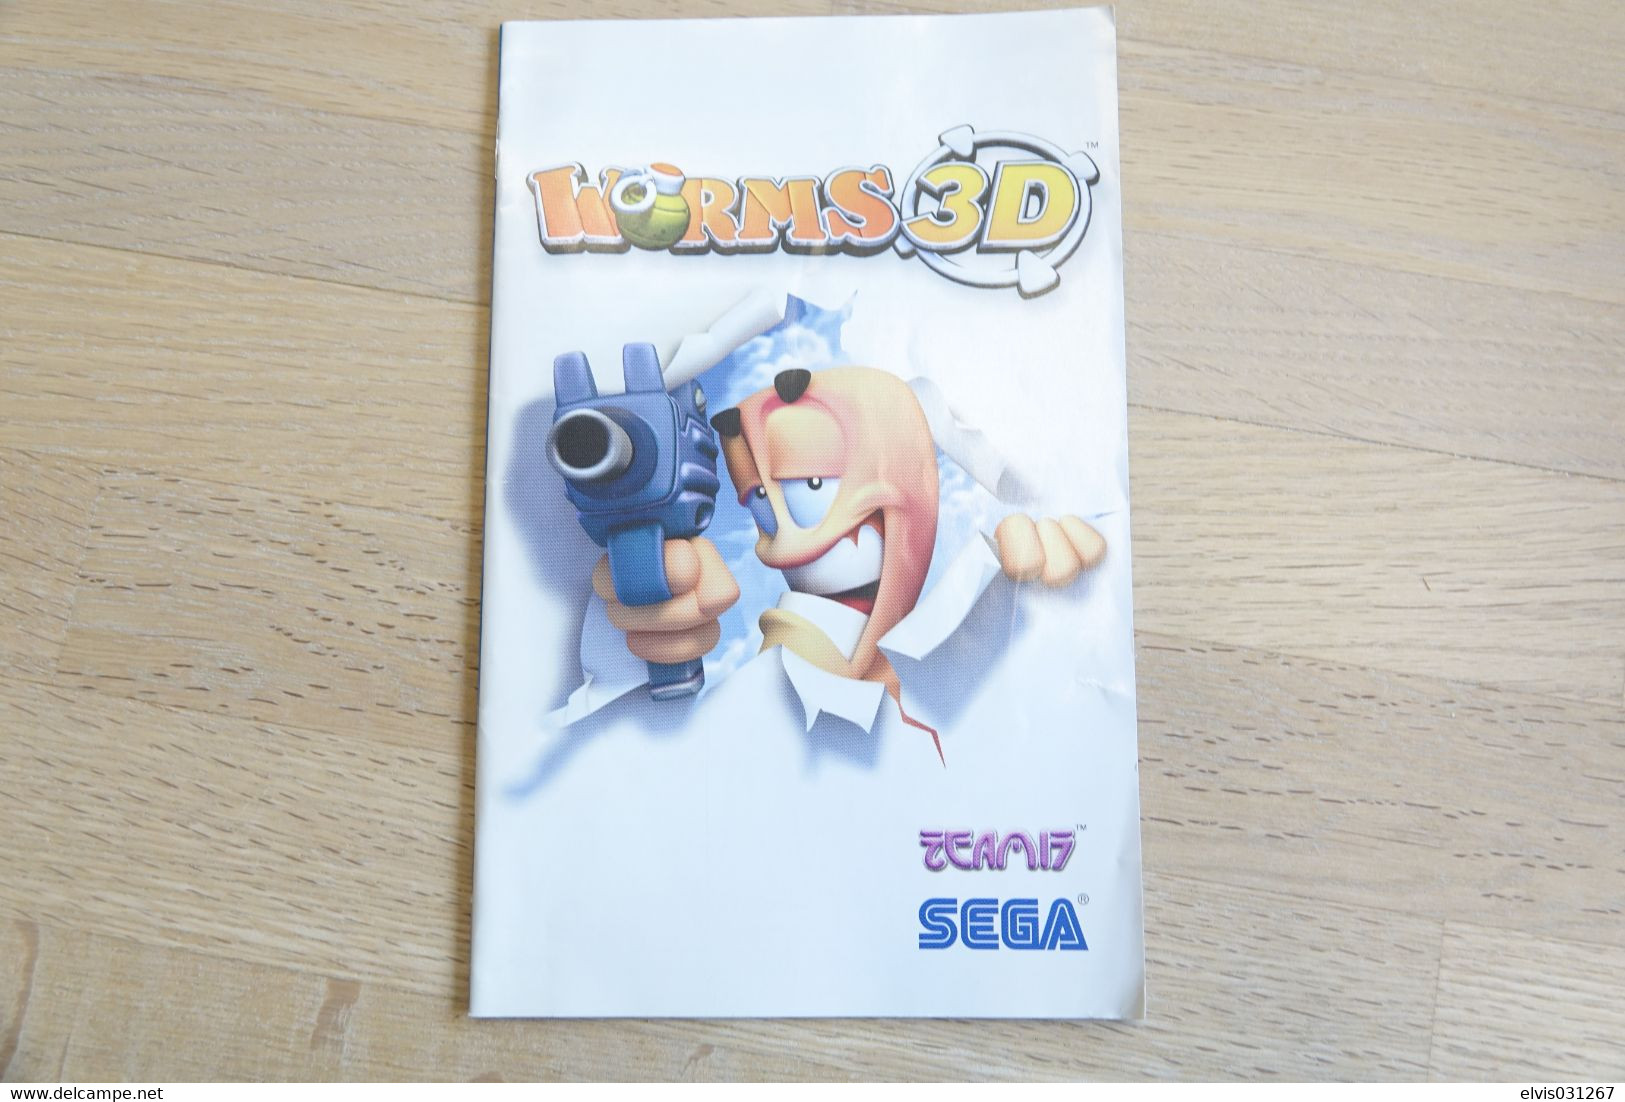 SONY PLAYSTATION TWO 2 PS2 : MANUAL : WORMS 3D - Literatur Und Anleitungen